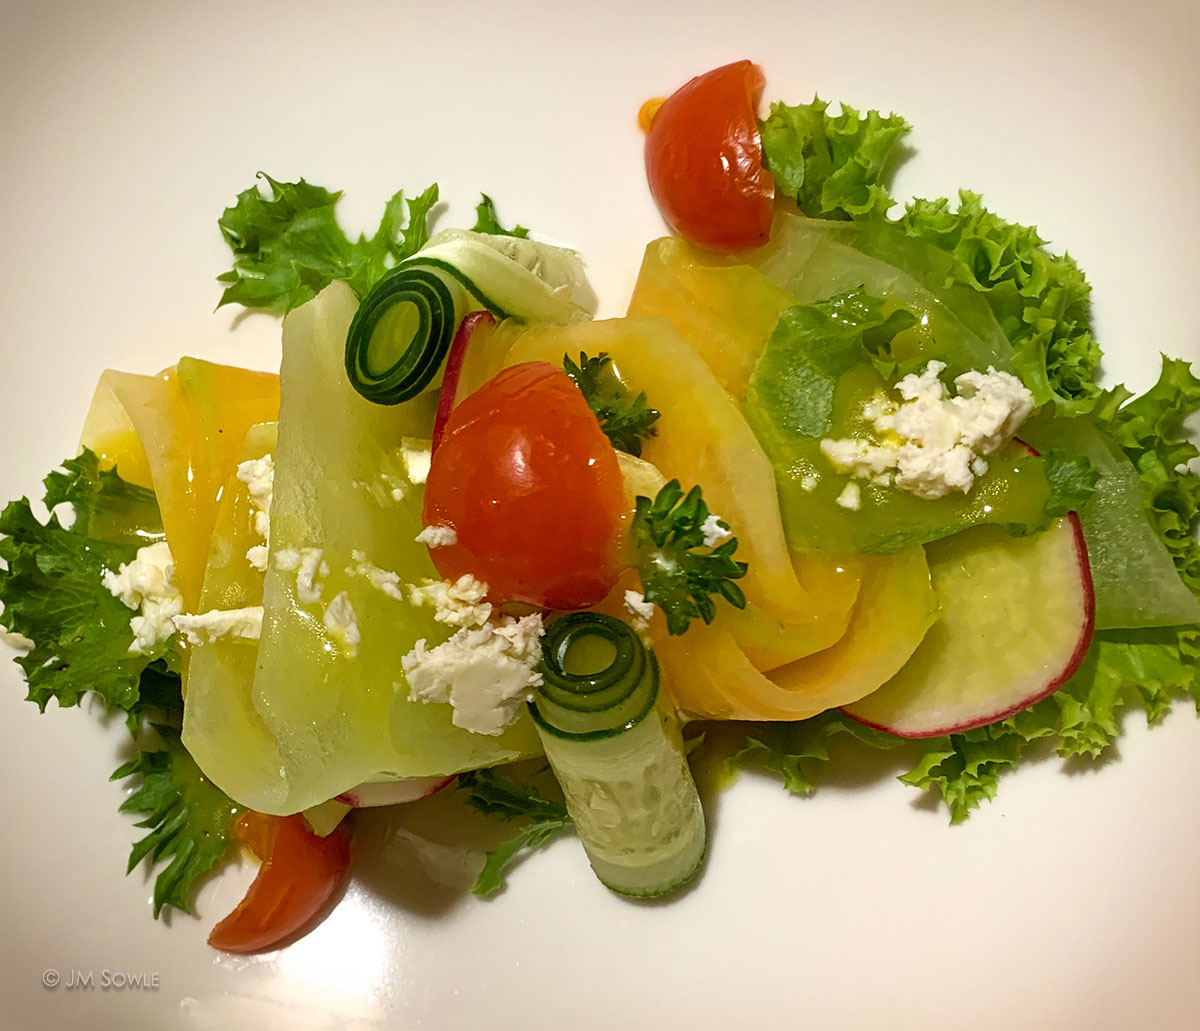 IMG_2250_1200.jpg - Just a phone pic of an appetizer we tried (sliced melon with feta cheese and a tangy citrus sauce).